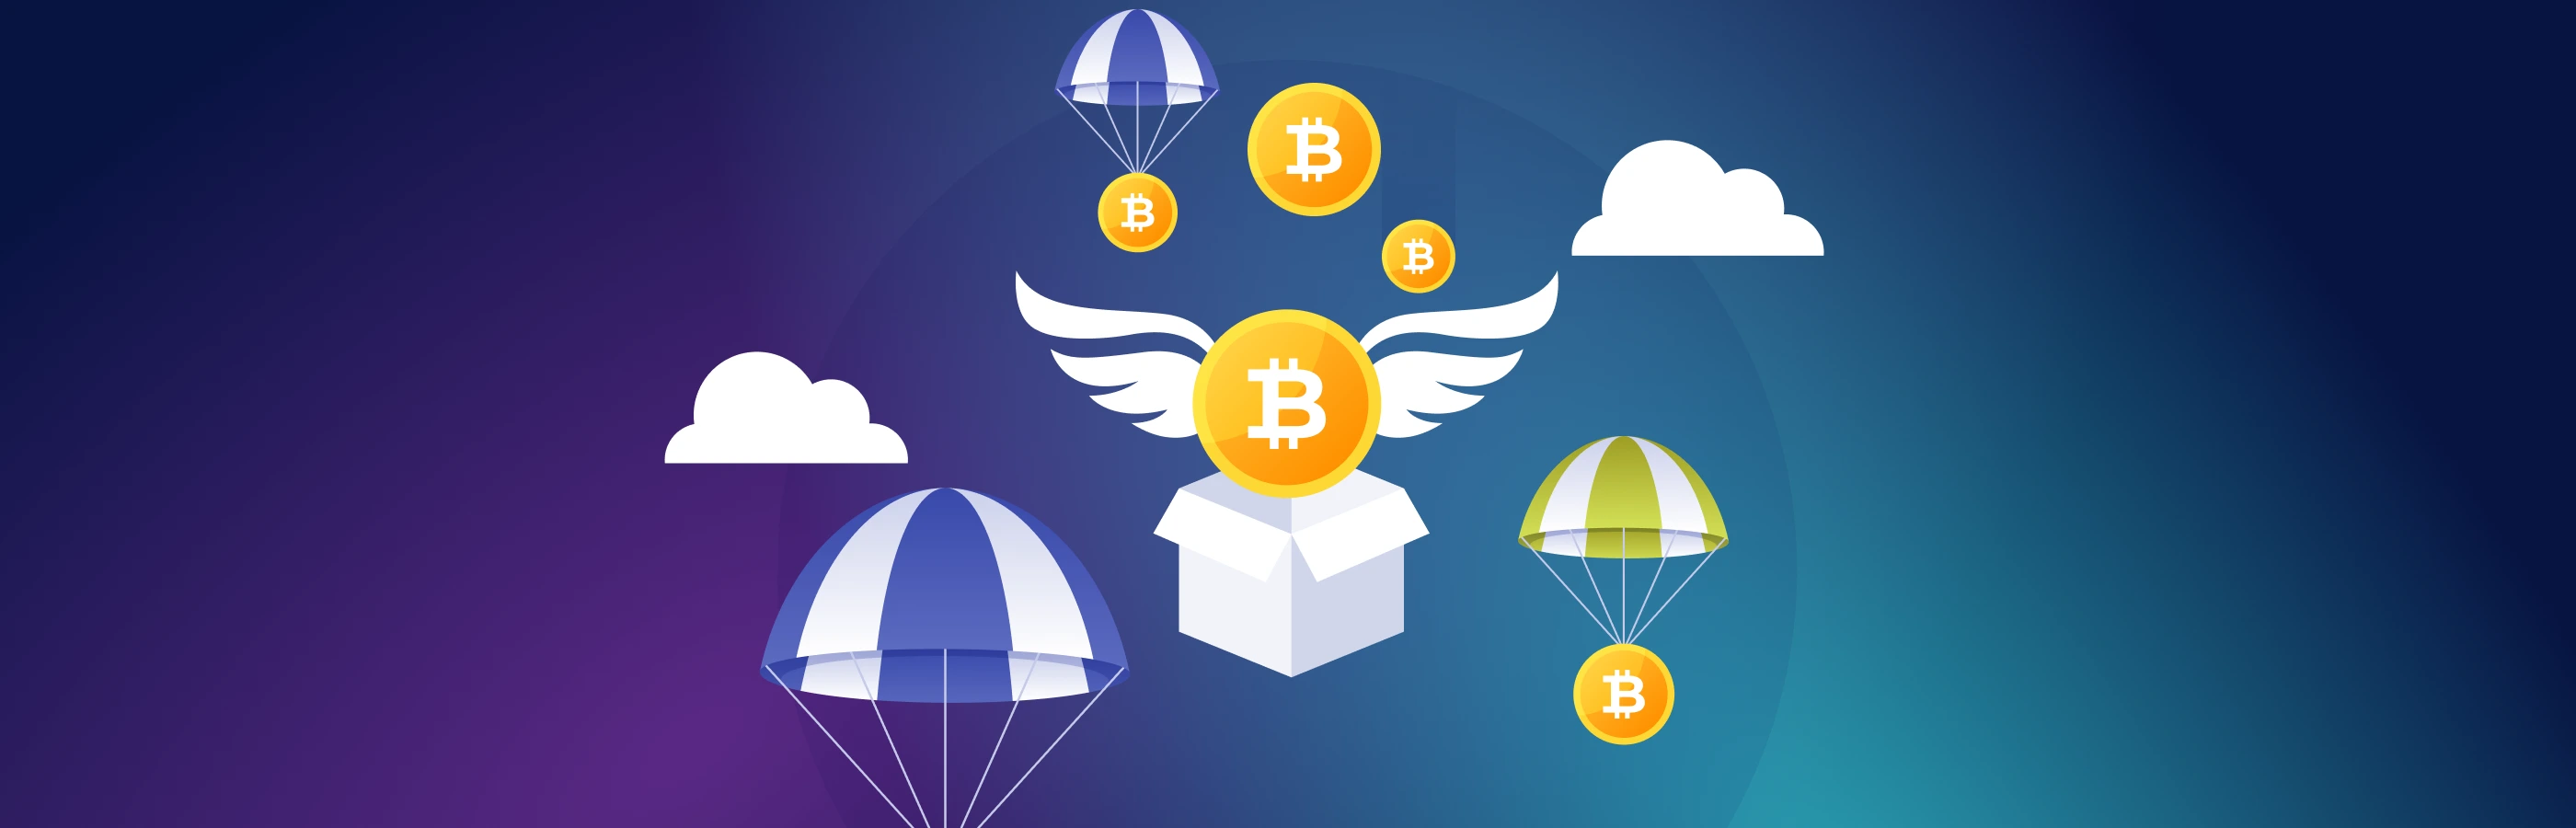 How to make money on airdrop distributions: secrets of success